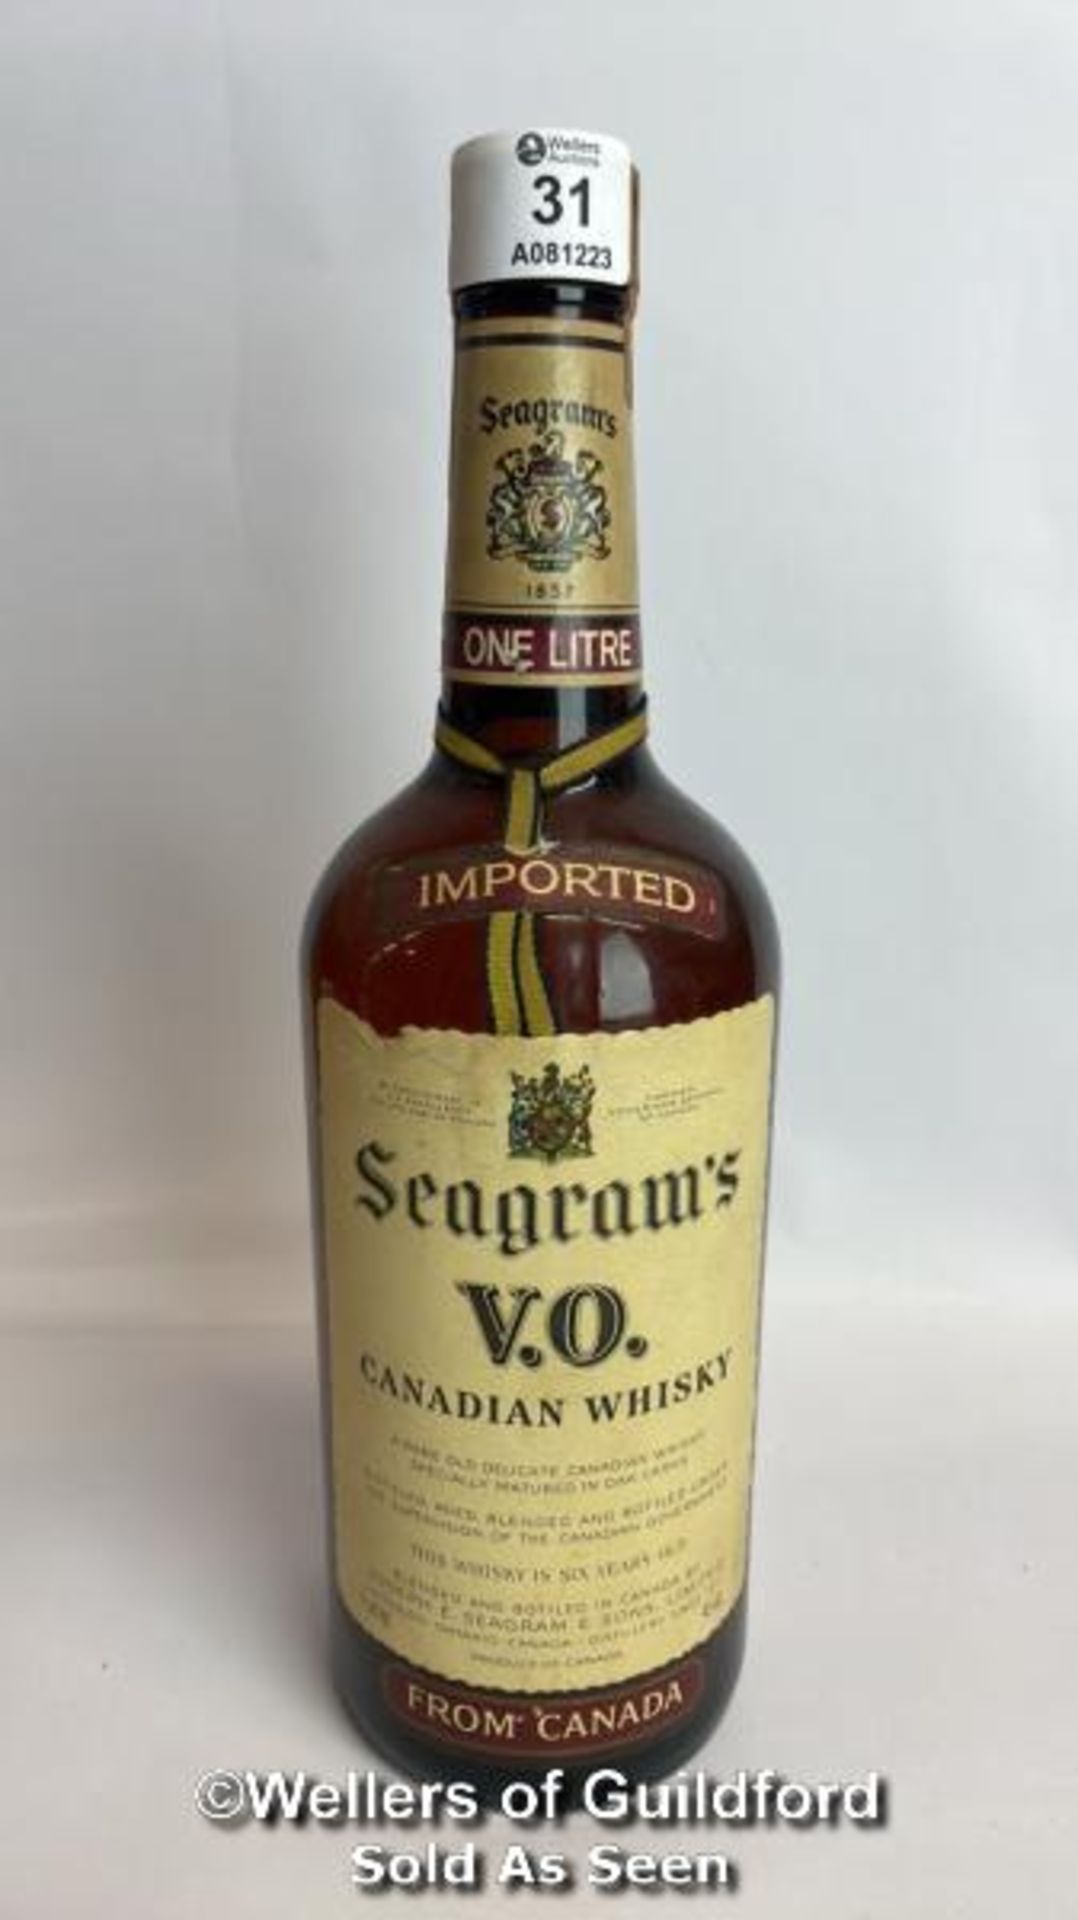 Seagrams V.O. Canadian Whisky, Aged 6 Years, Bottled in 1982, 1L, 43% vol / Please see images for - Image 2 of 12